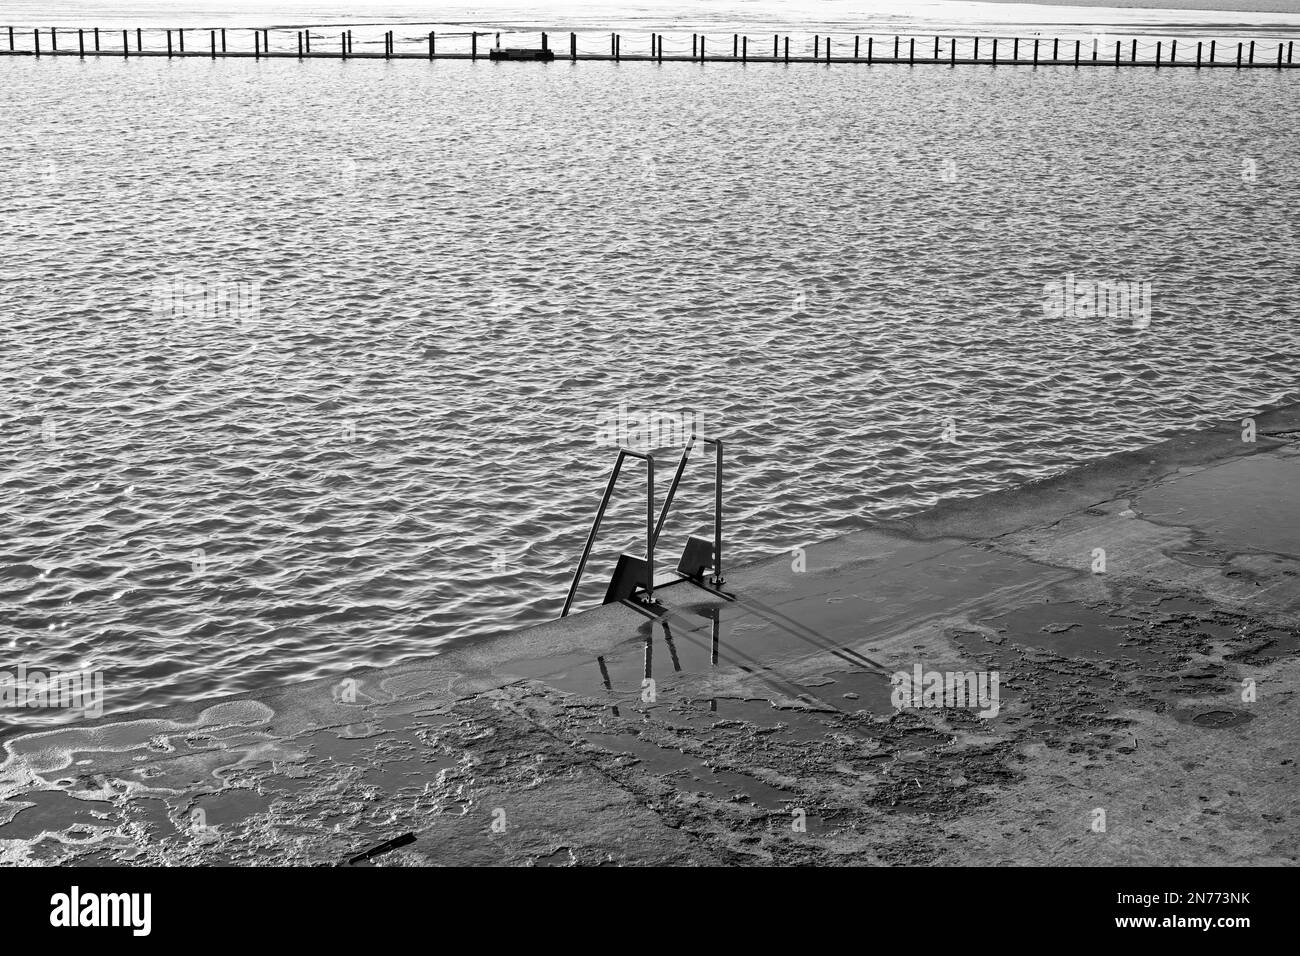 A ladder enabling swimmers to climb in and out of the Marine Lake in Weston-super-Mare, UK Stock Photo